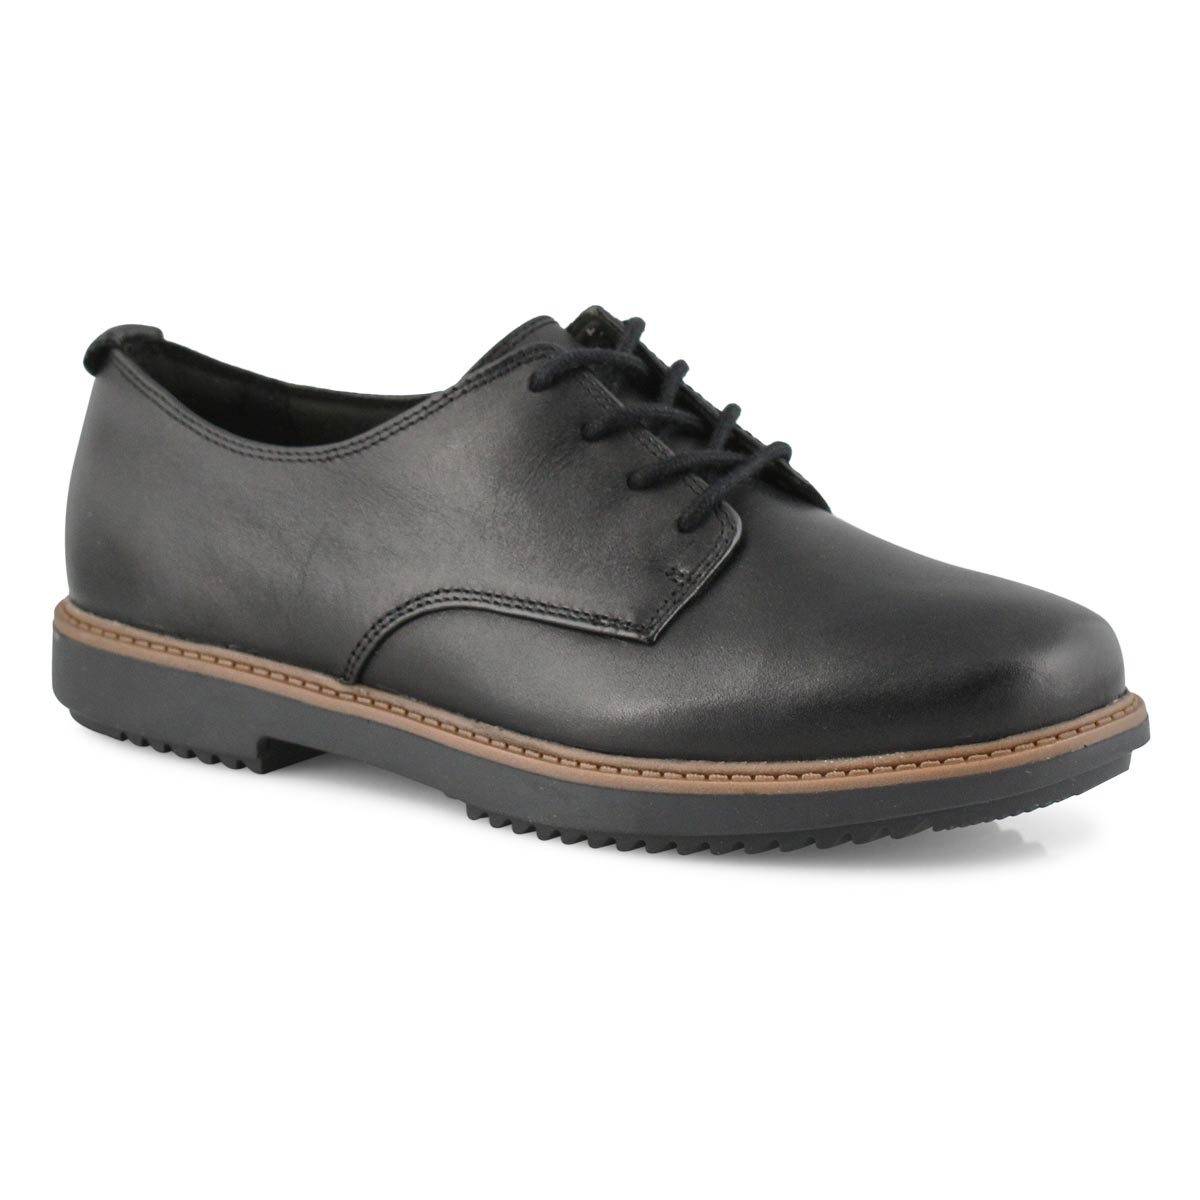 womens casual oxfords